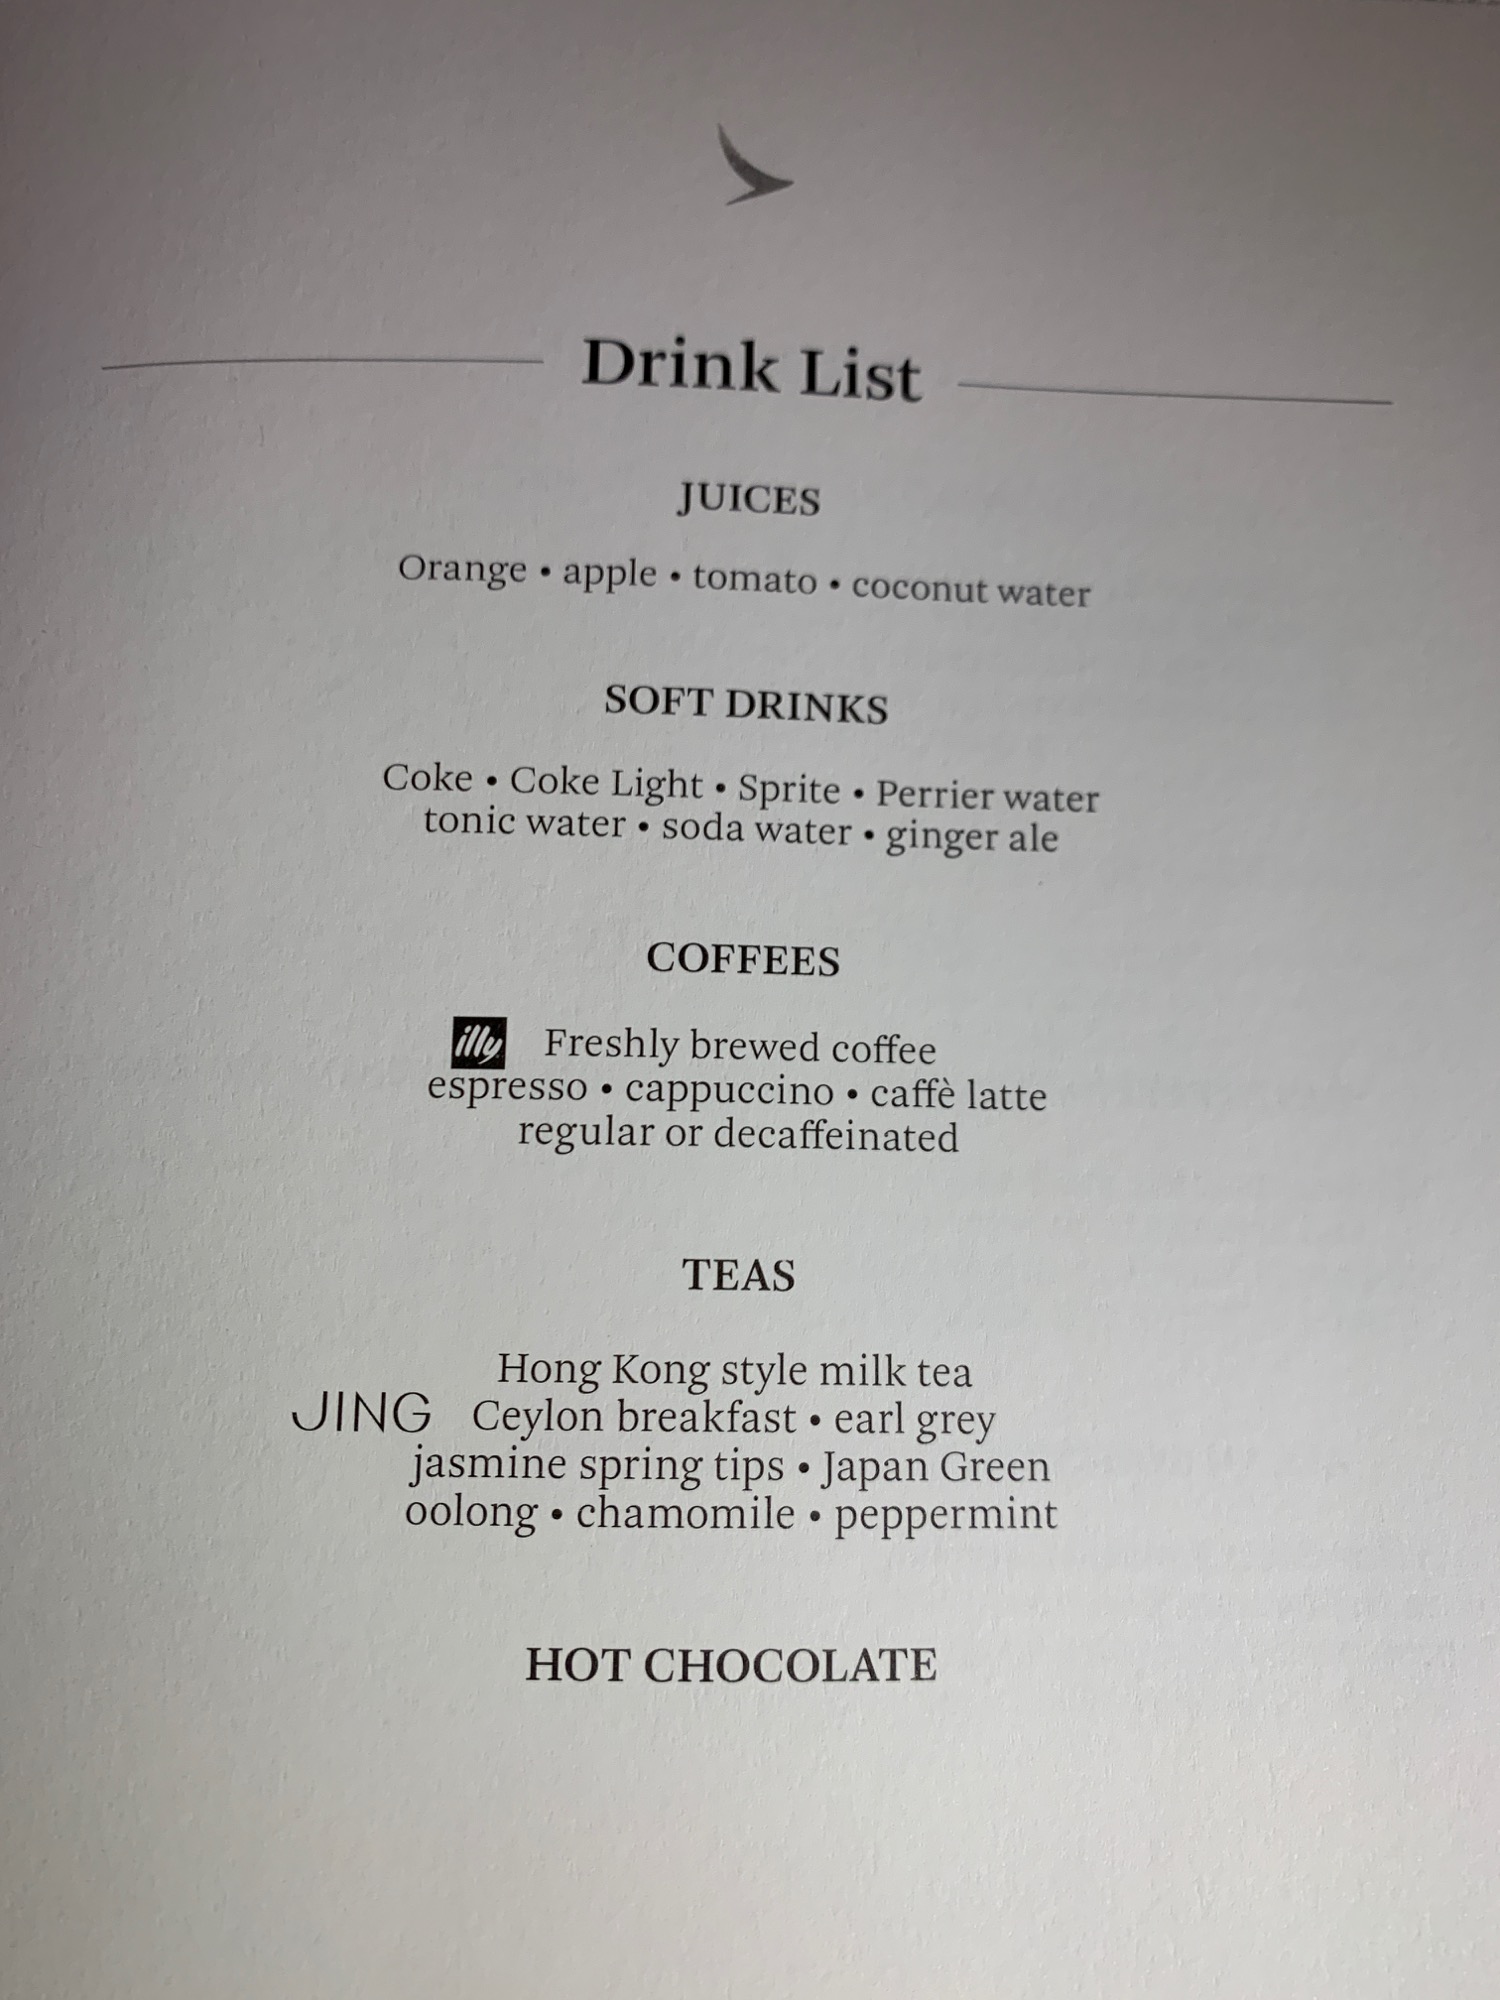 a menu of drinks and coffees